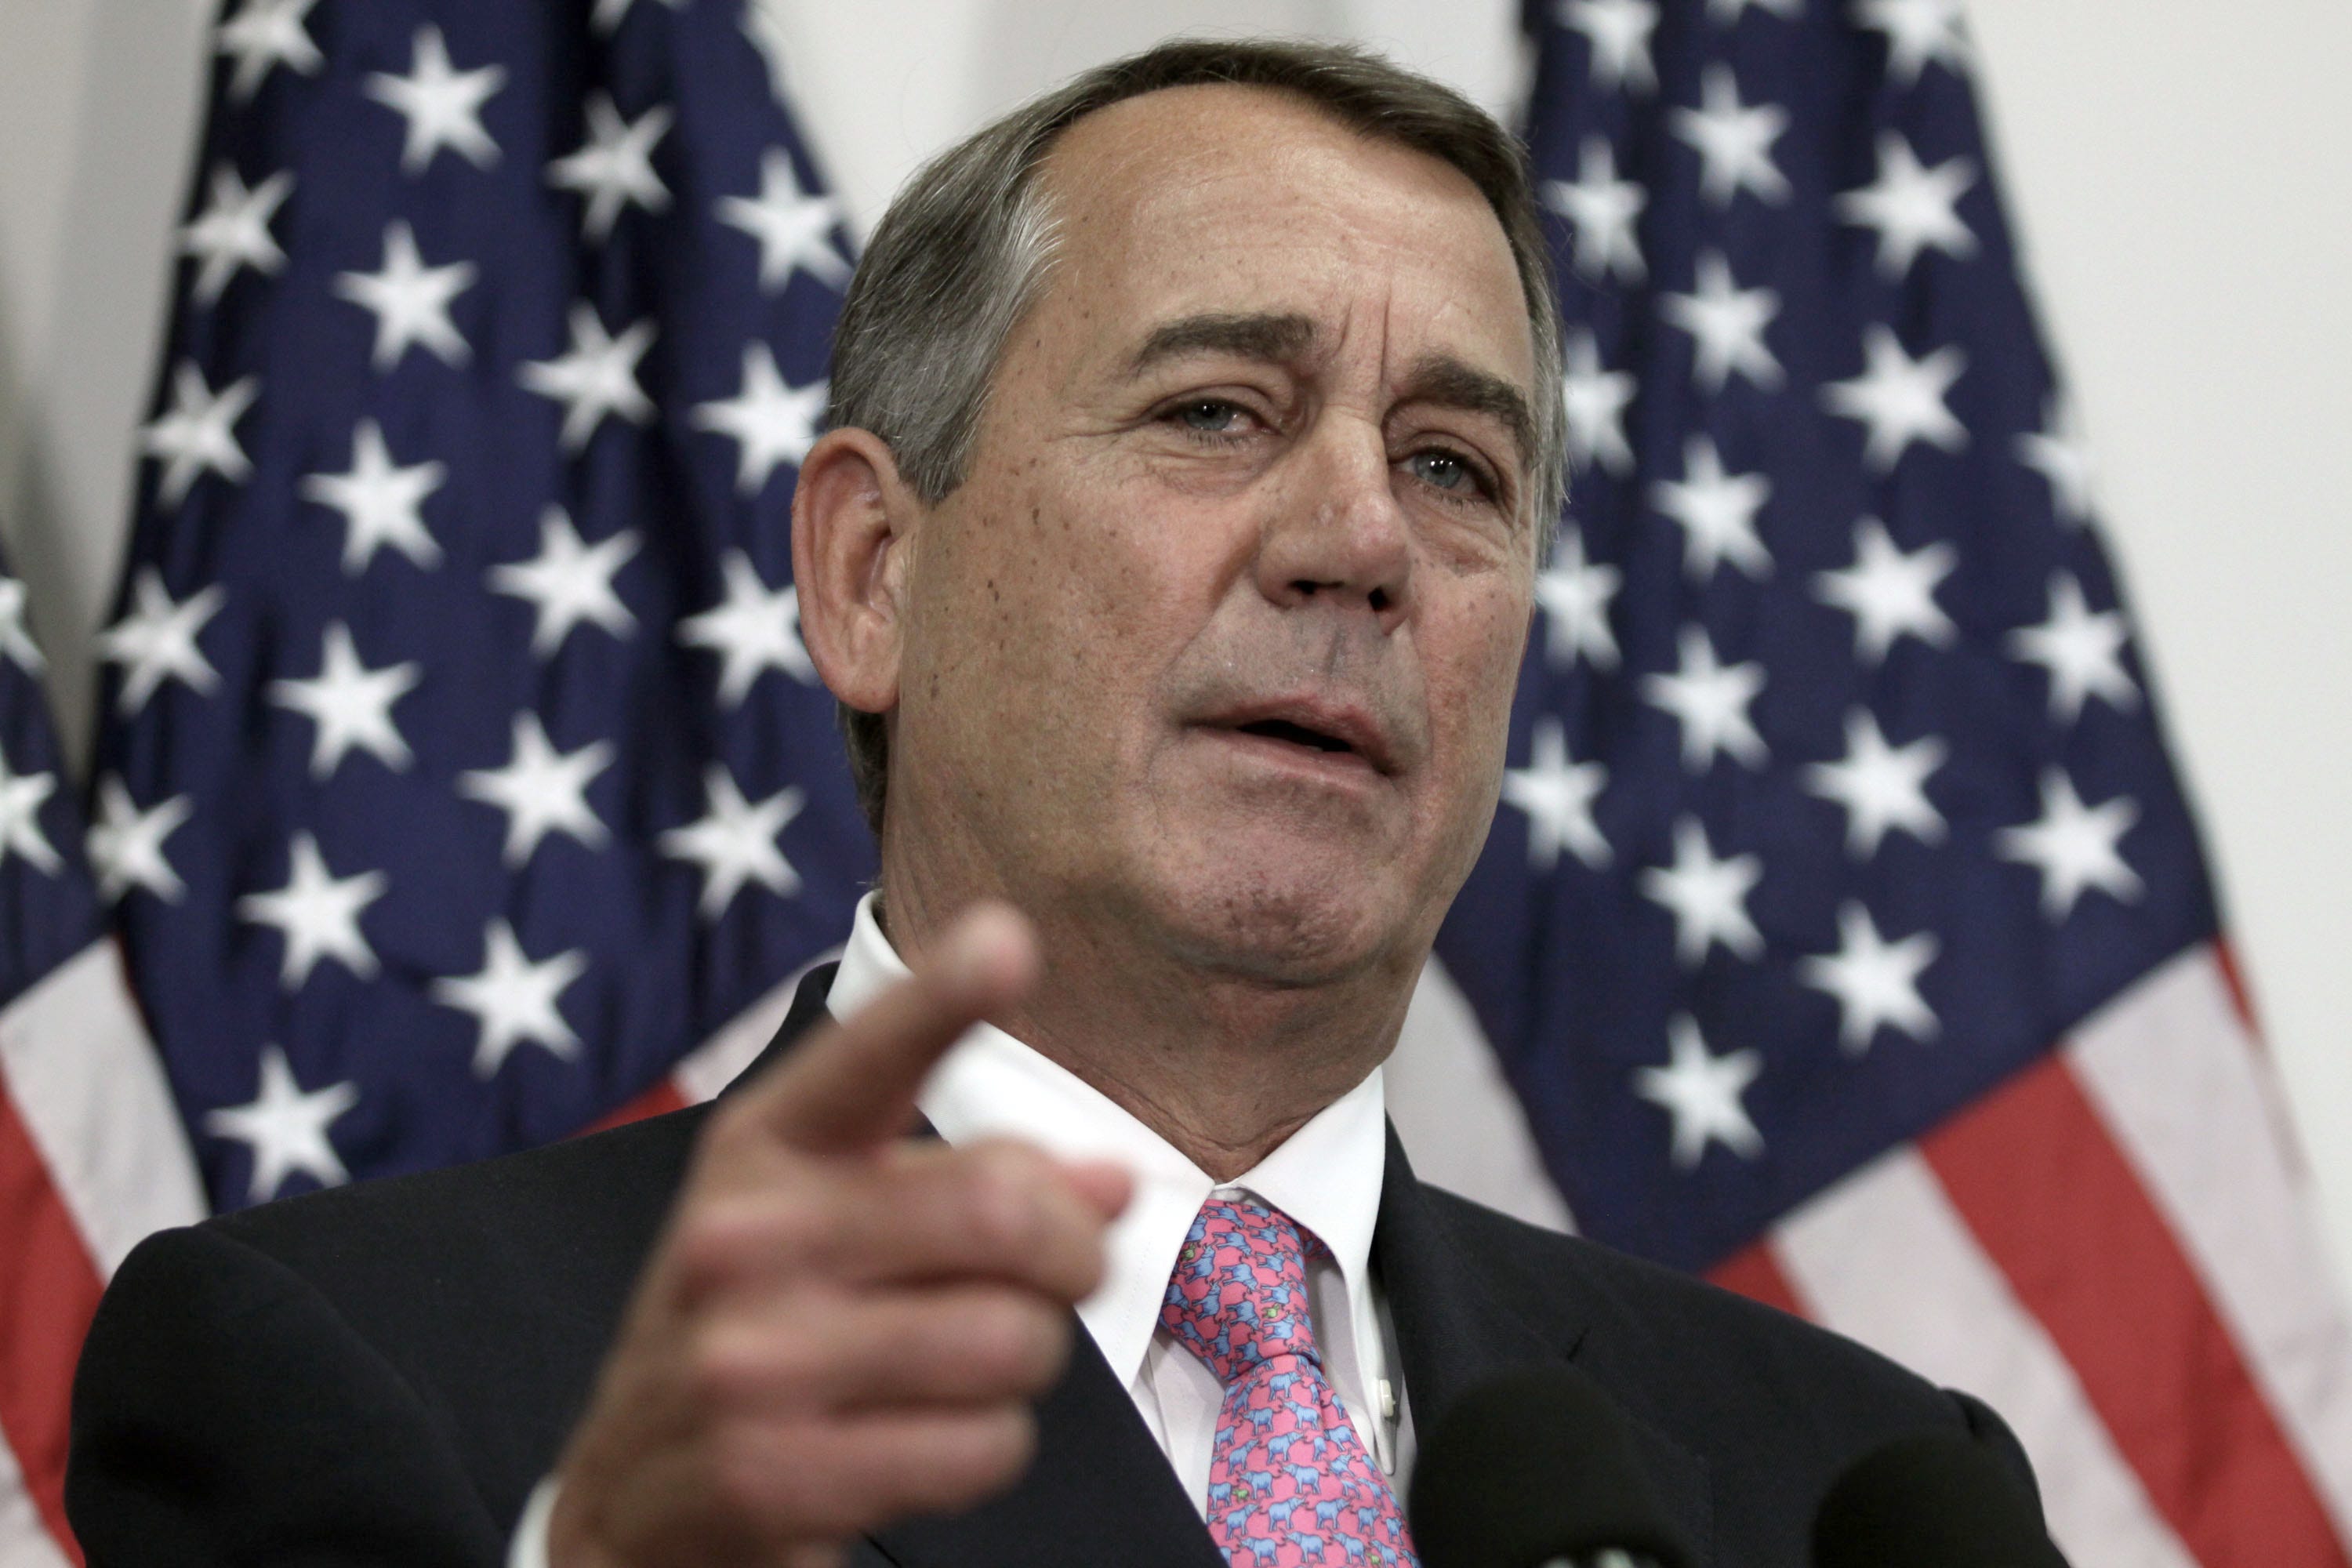 John Boehner: Republicans are 'never' going to repeal Obamacare